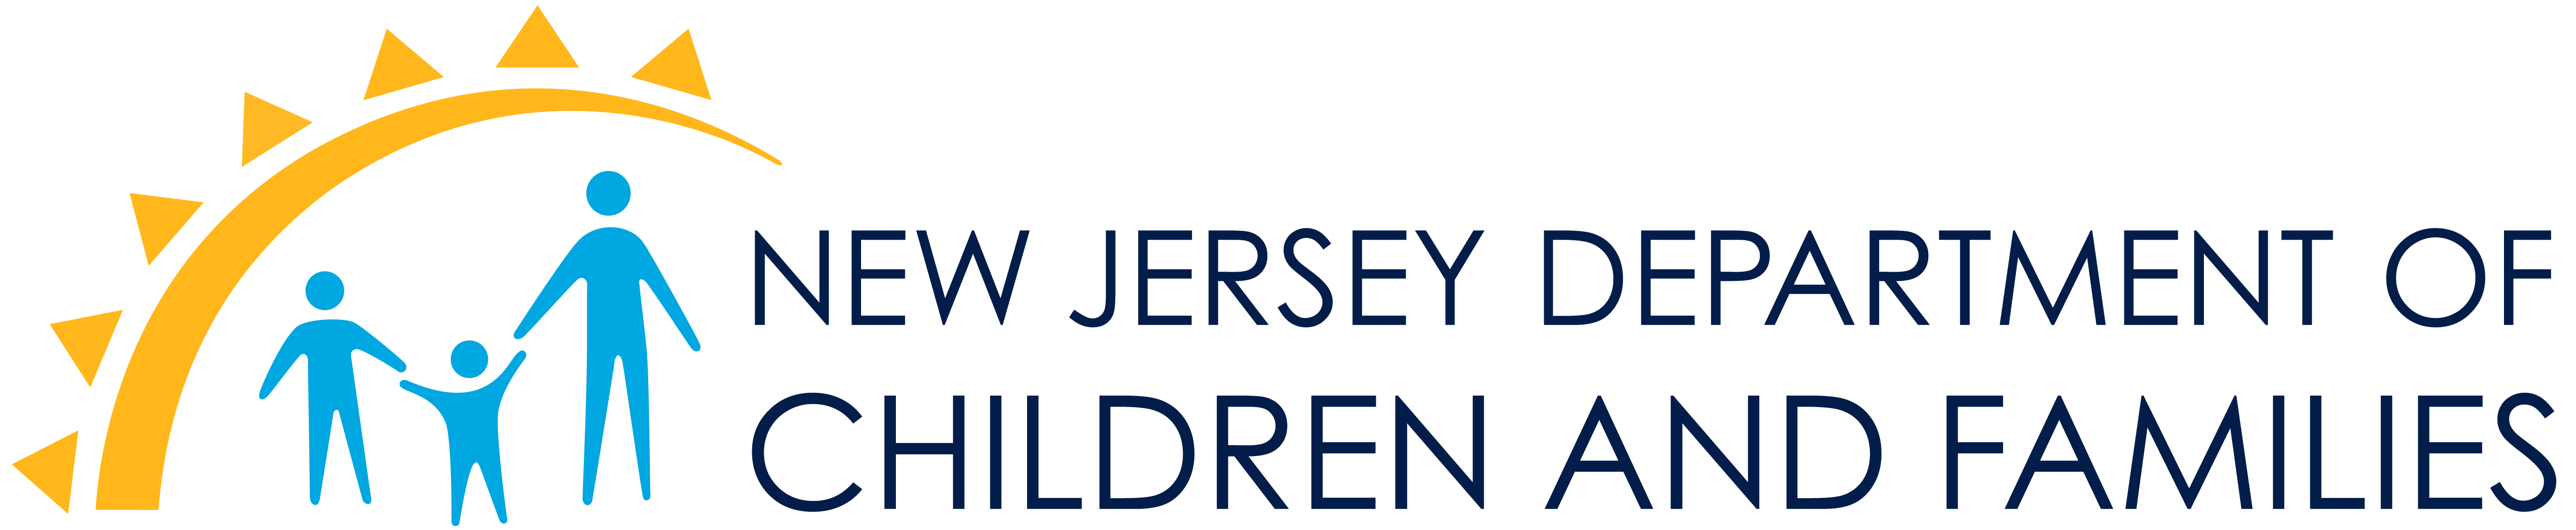 New Jersey Department Of Children And Families